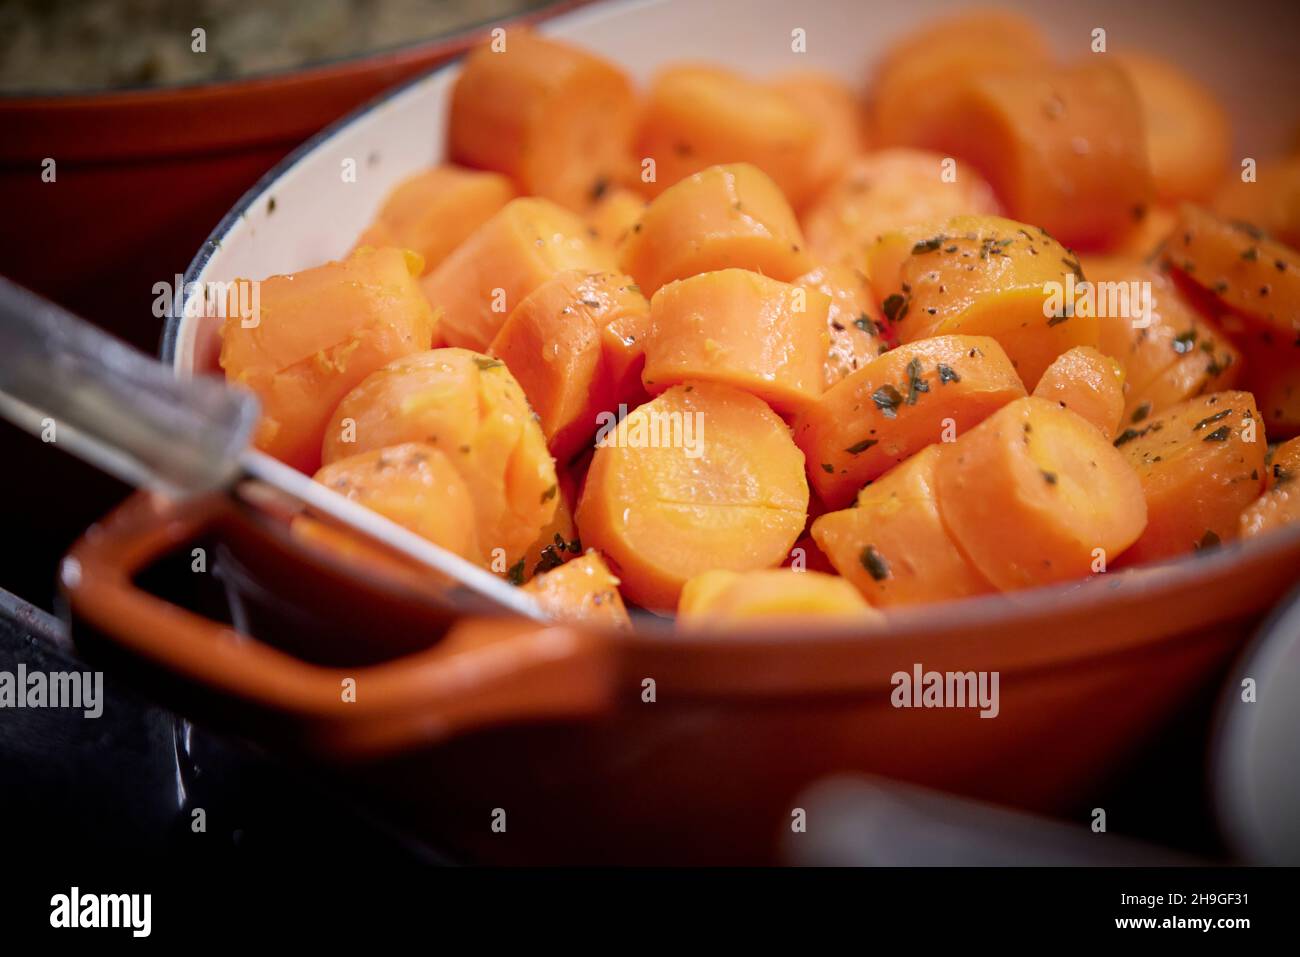 Pub carvery self service cooking pot of carrots Stock Photo